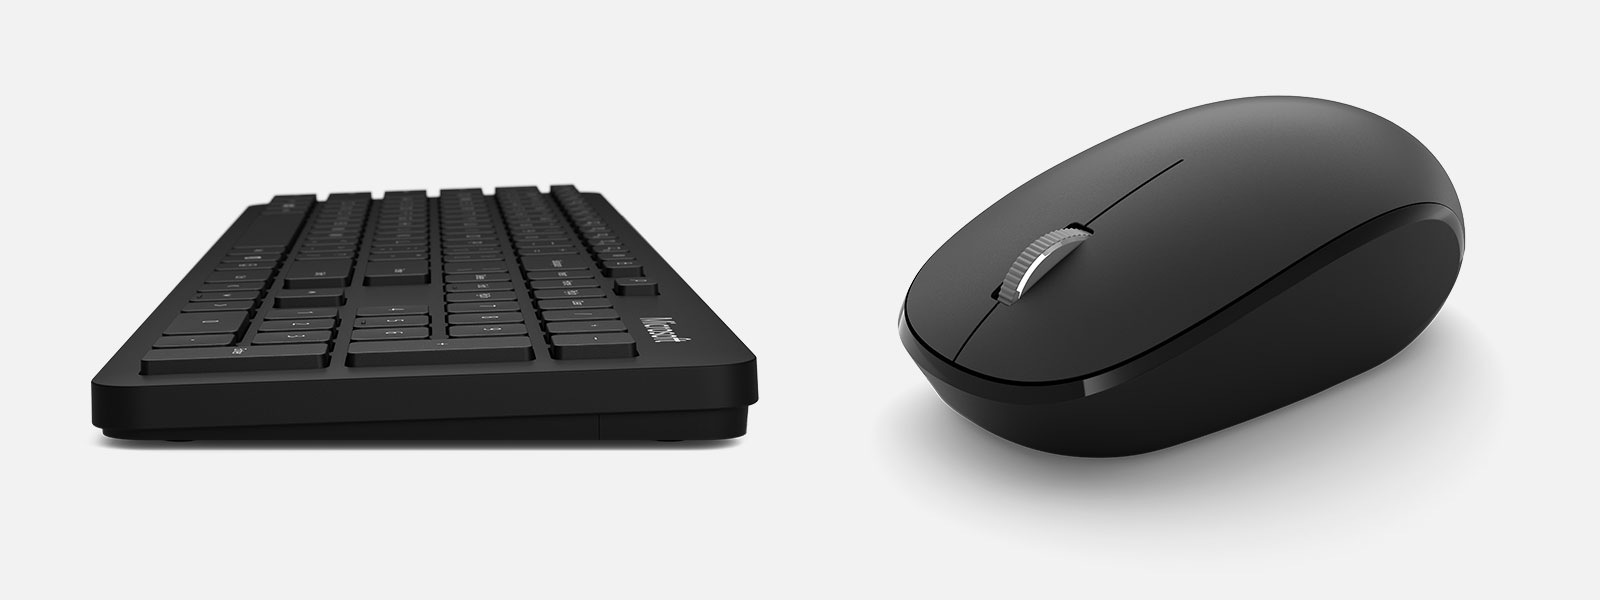 Side angle of Microsoft Bluetooth Keyboard and Mouse.